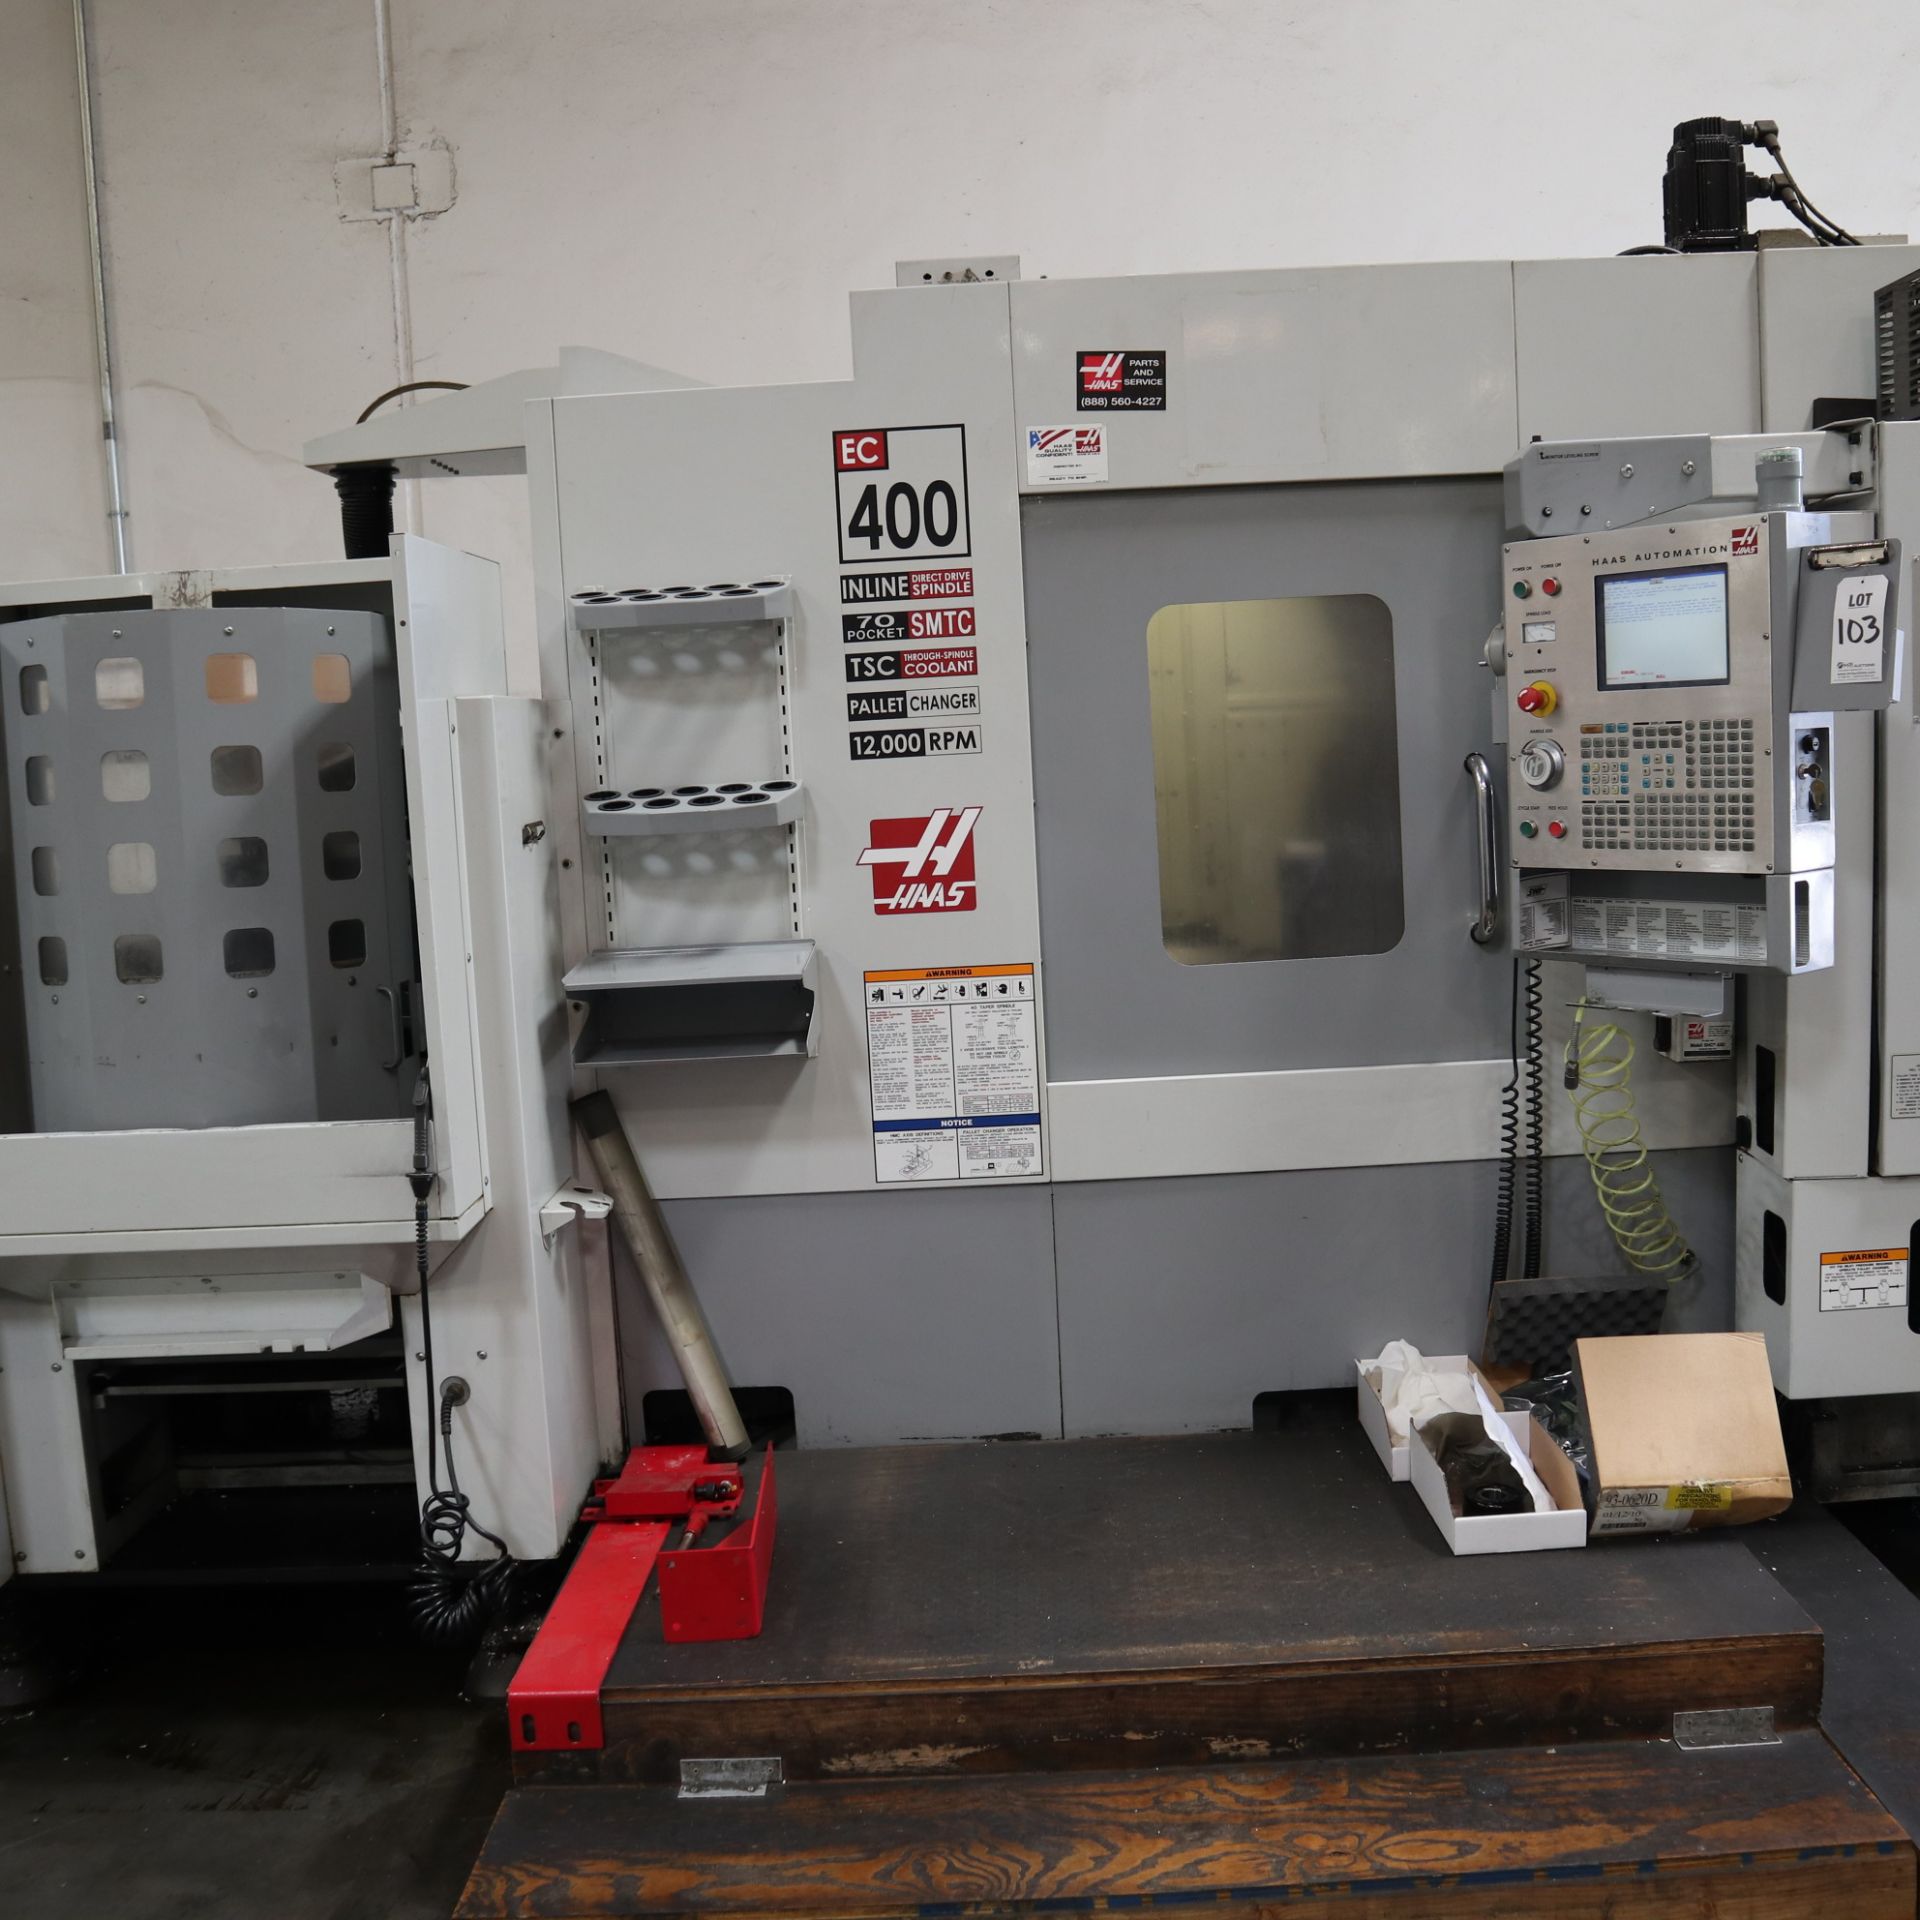 2006 HAAS EC400-6PP, HAAS CONTROL, FULL 4TH AXIS, 70 TOOL ATC, COOLANT THROUGH SPINDLE, 12,000 RPM - Image 2 of 19